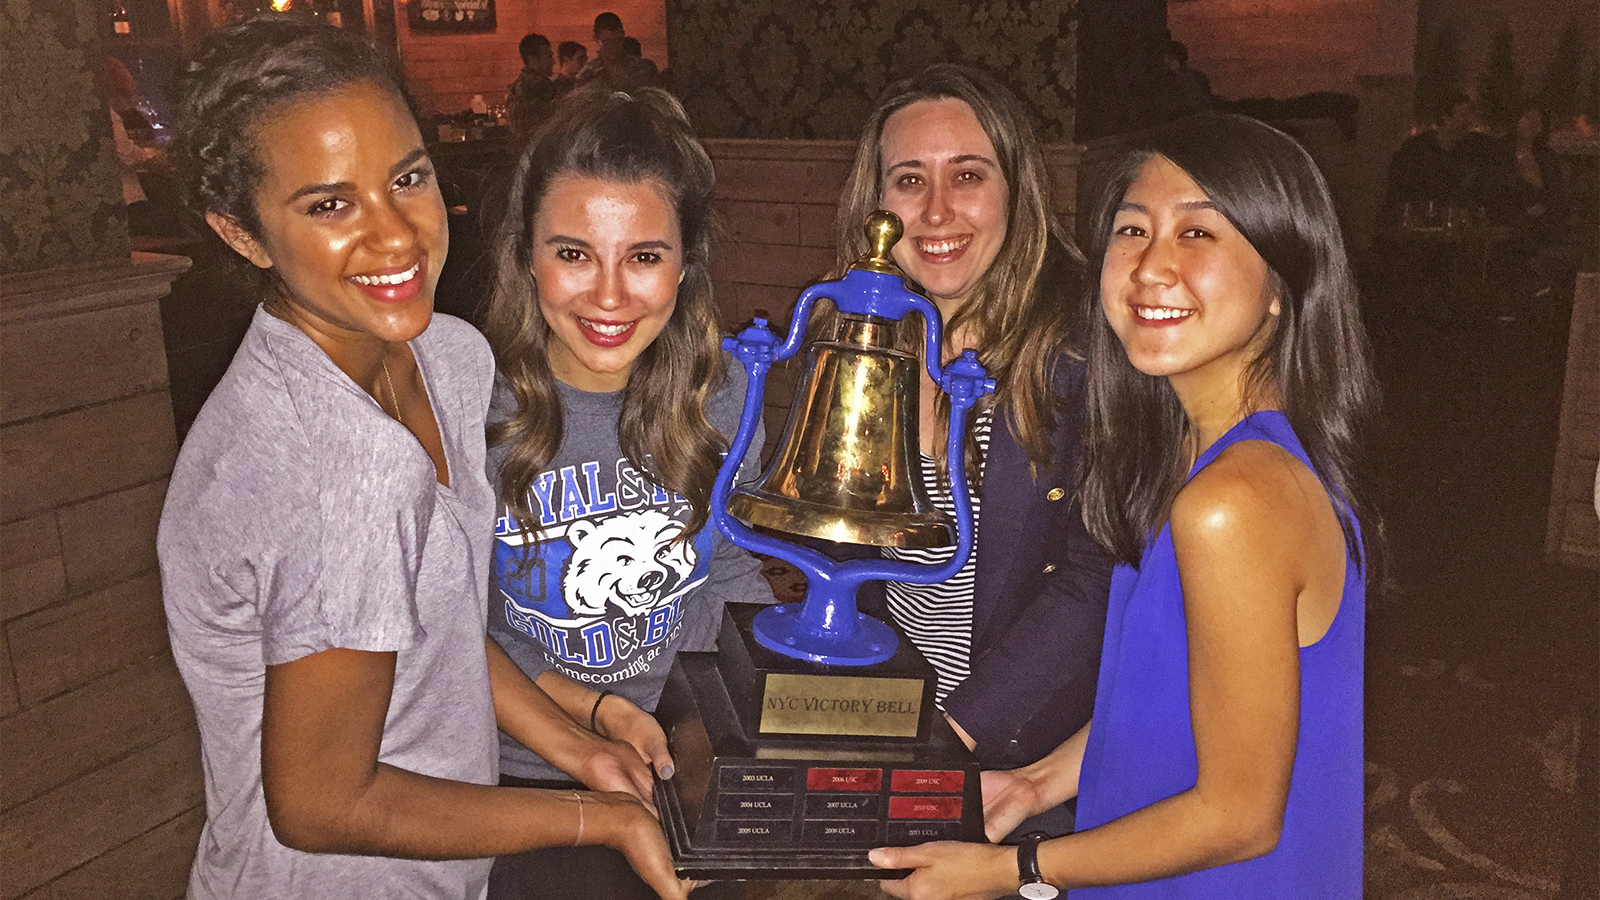 Bruins hold up the NYC Victory Bell flag football trophy